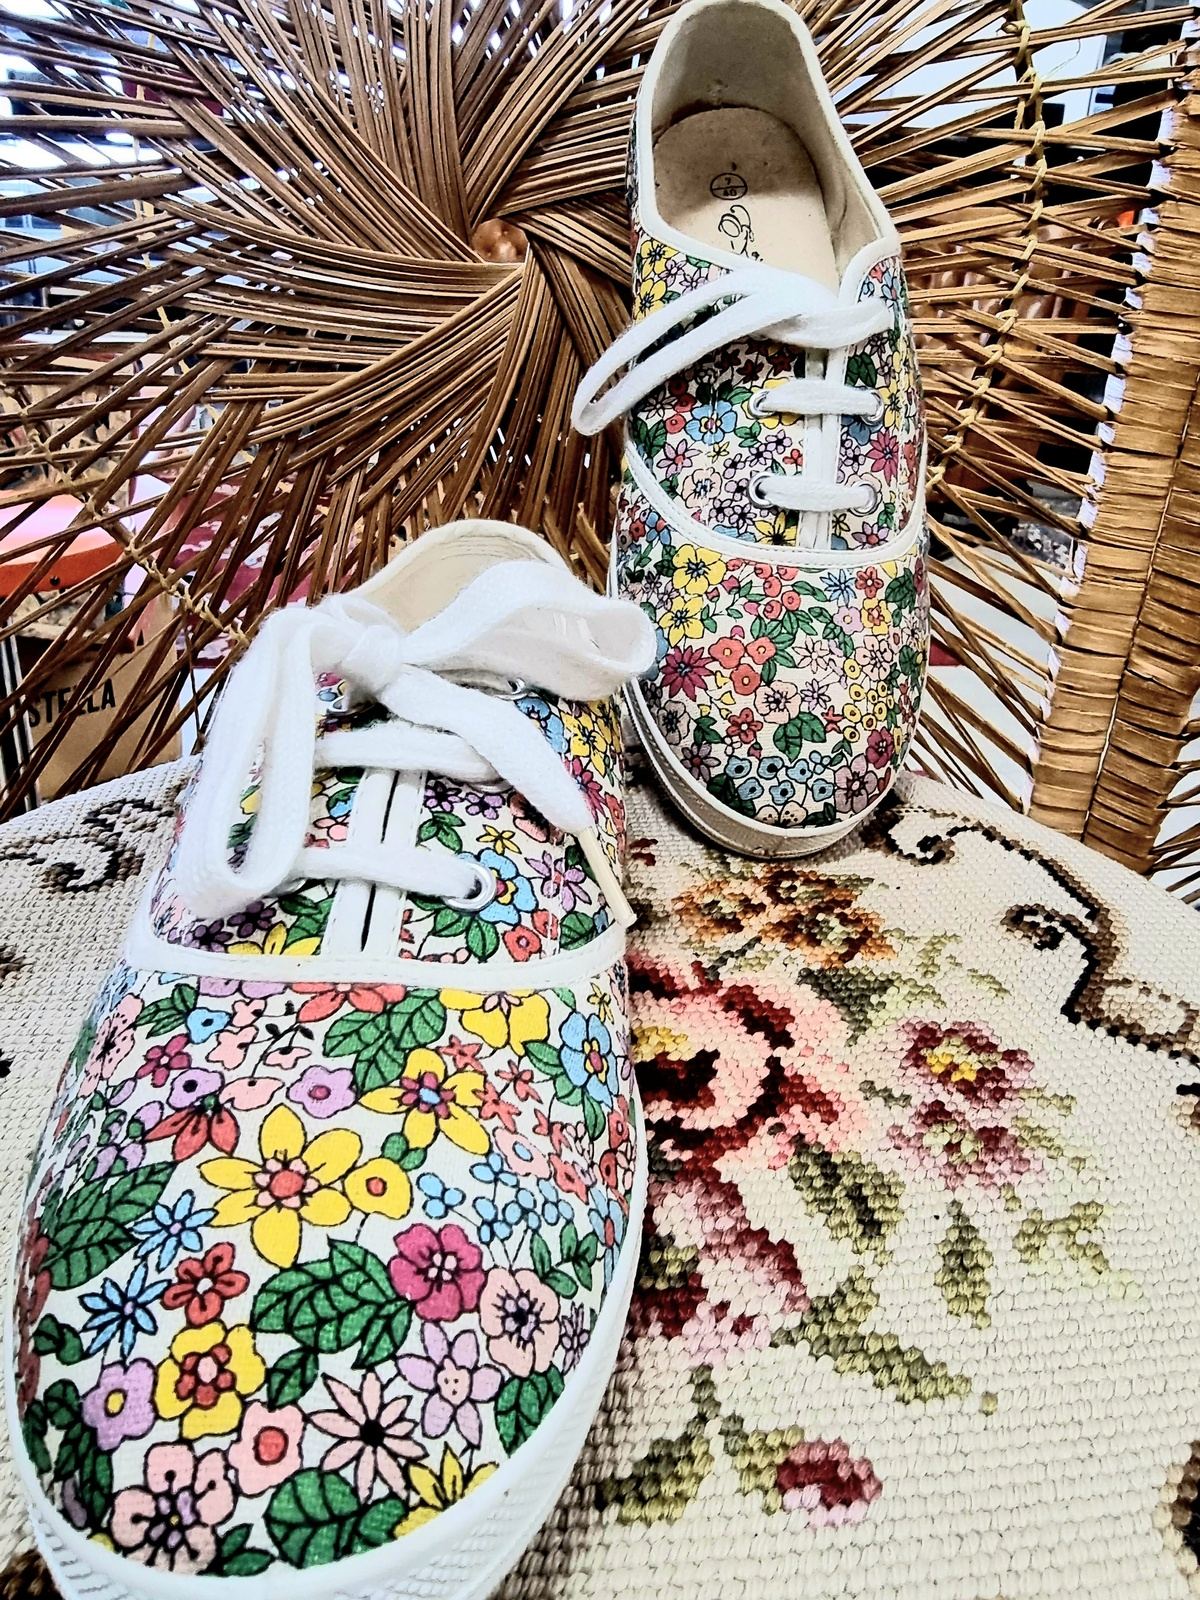 Brand New 1980's Floral Shoes